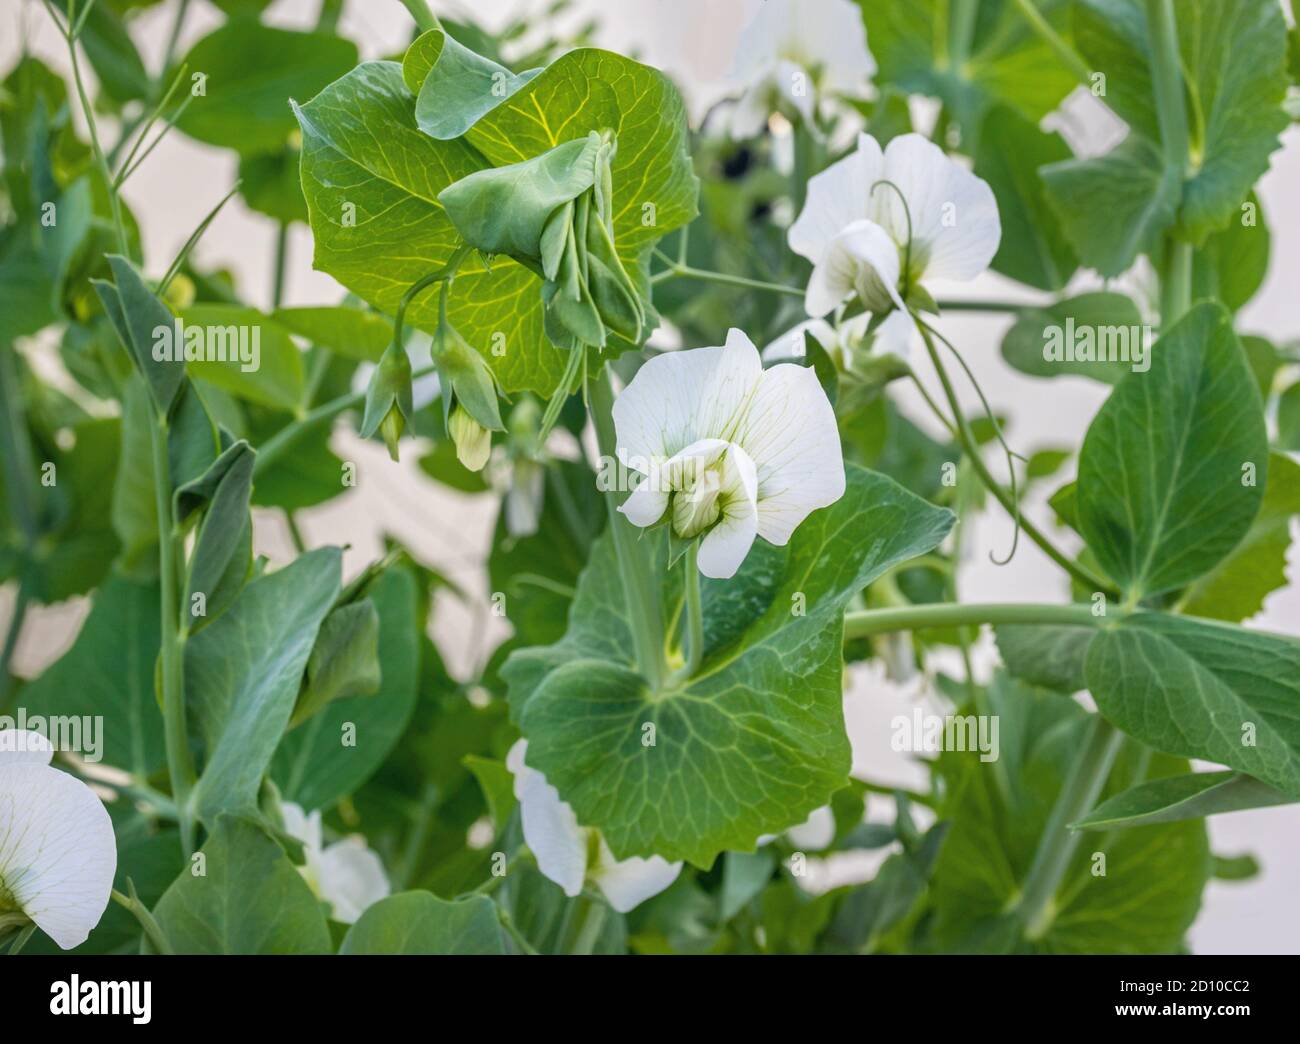 Multiple white pea blossoms in front of soft green plants. Snap pea plant grown from seed, started in spring. Several stages of flowers and tendrils. Stock Photo